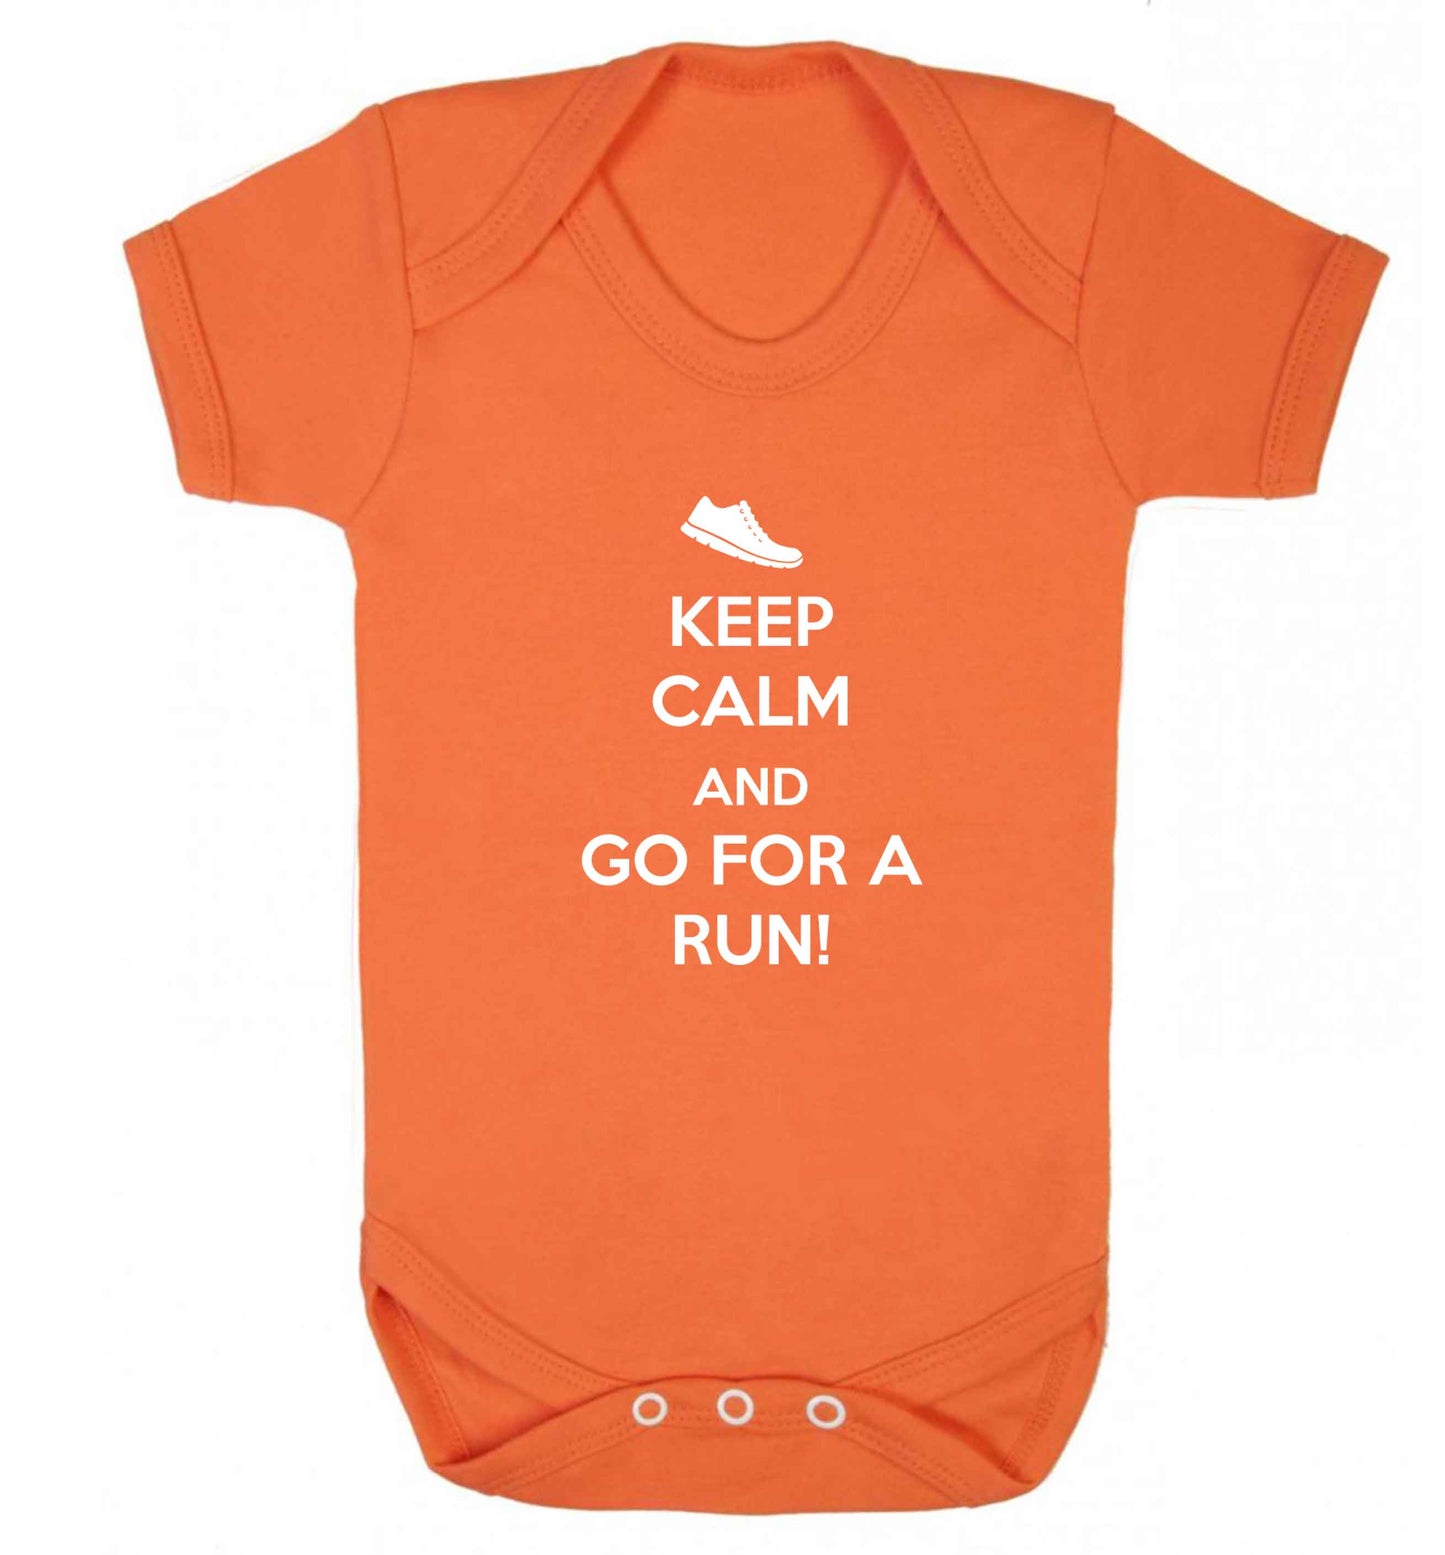 Keep calm and go for a run baby vest orange 18-24 months